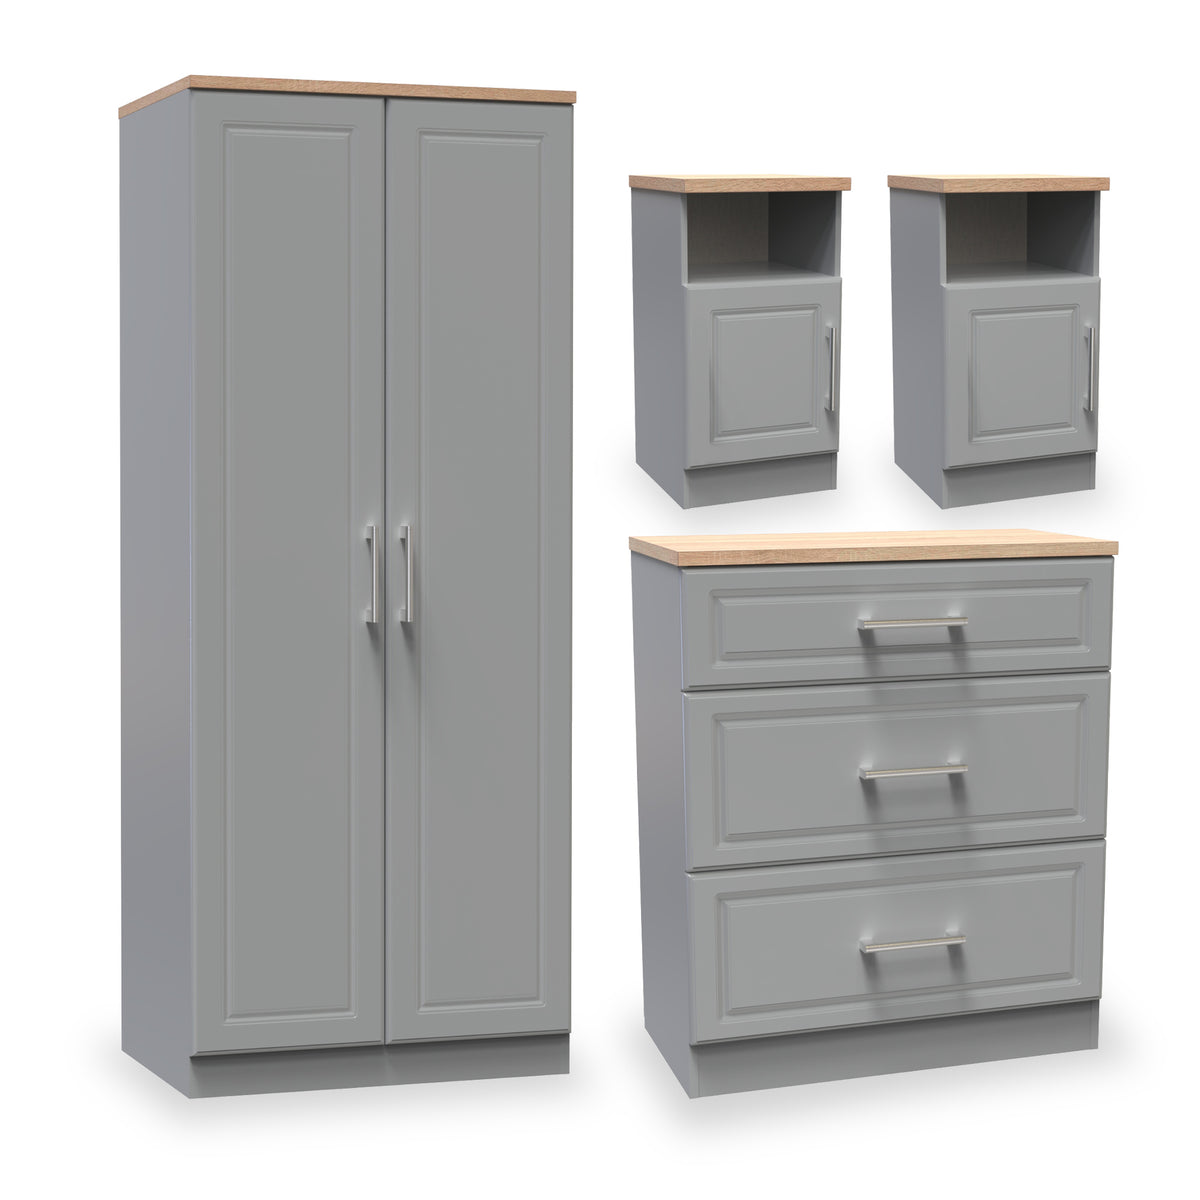 Talland Grey 4 Piece Bedroom Set with Oak Tops from Roseland Furniture